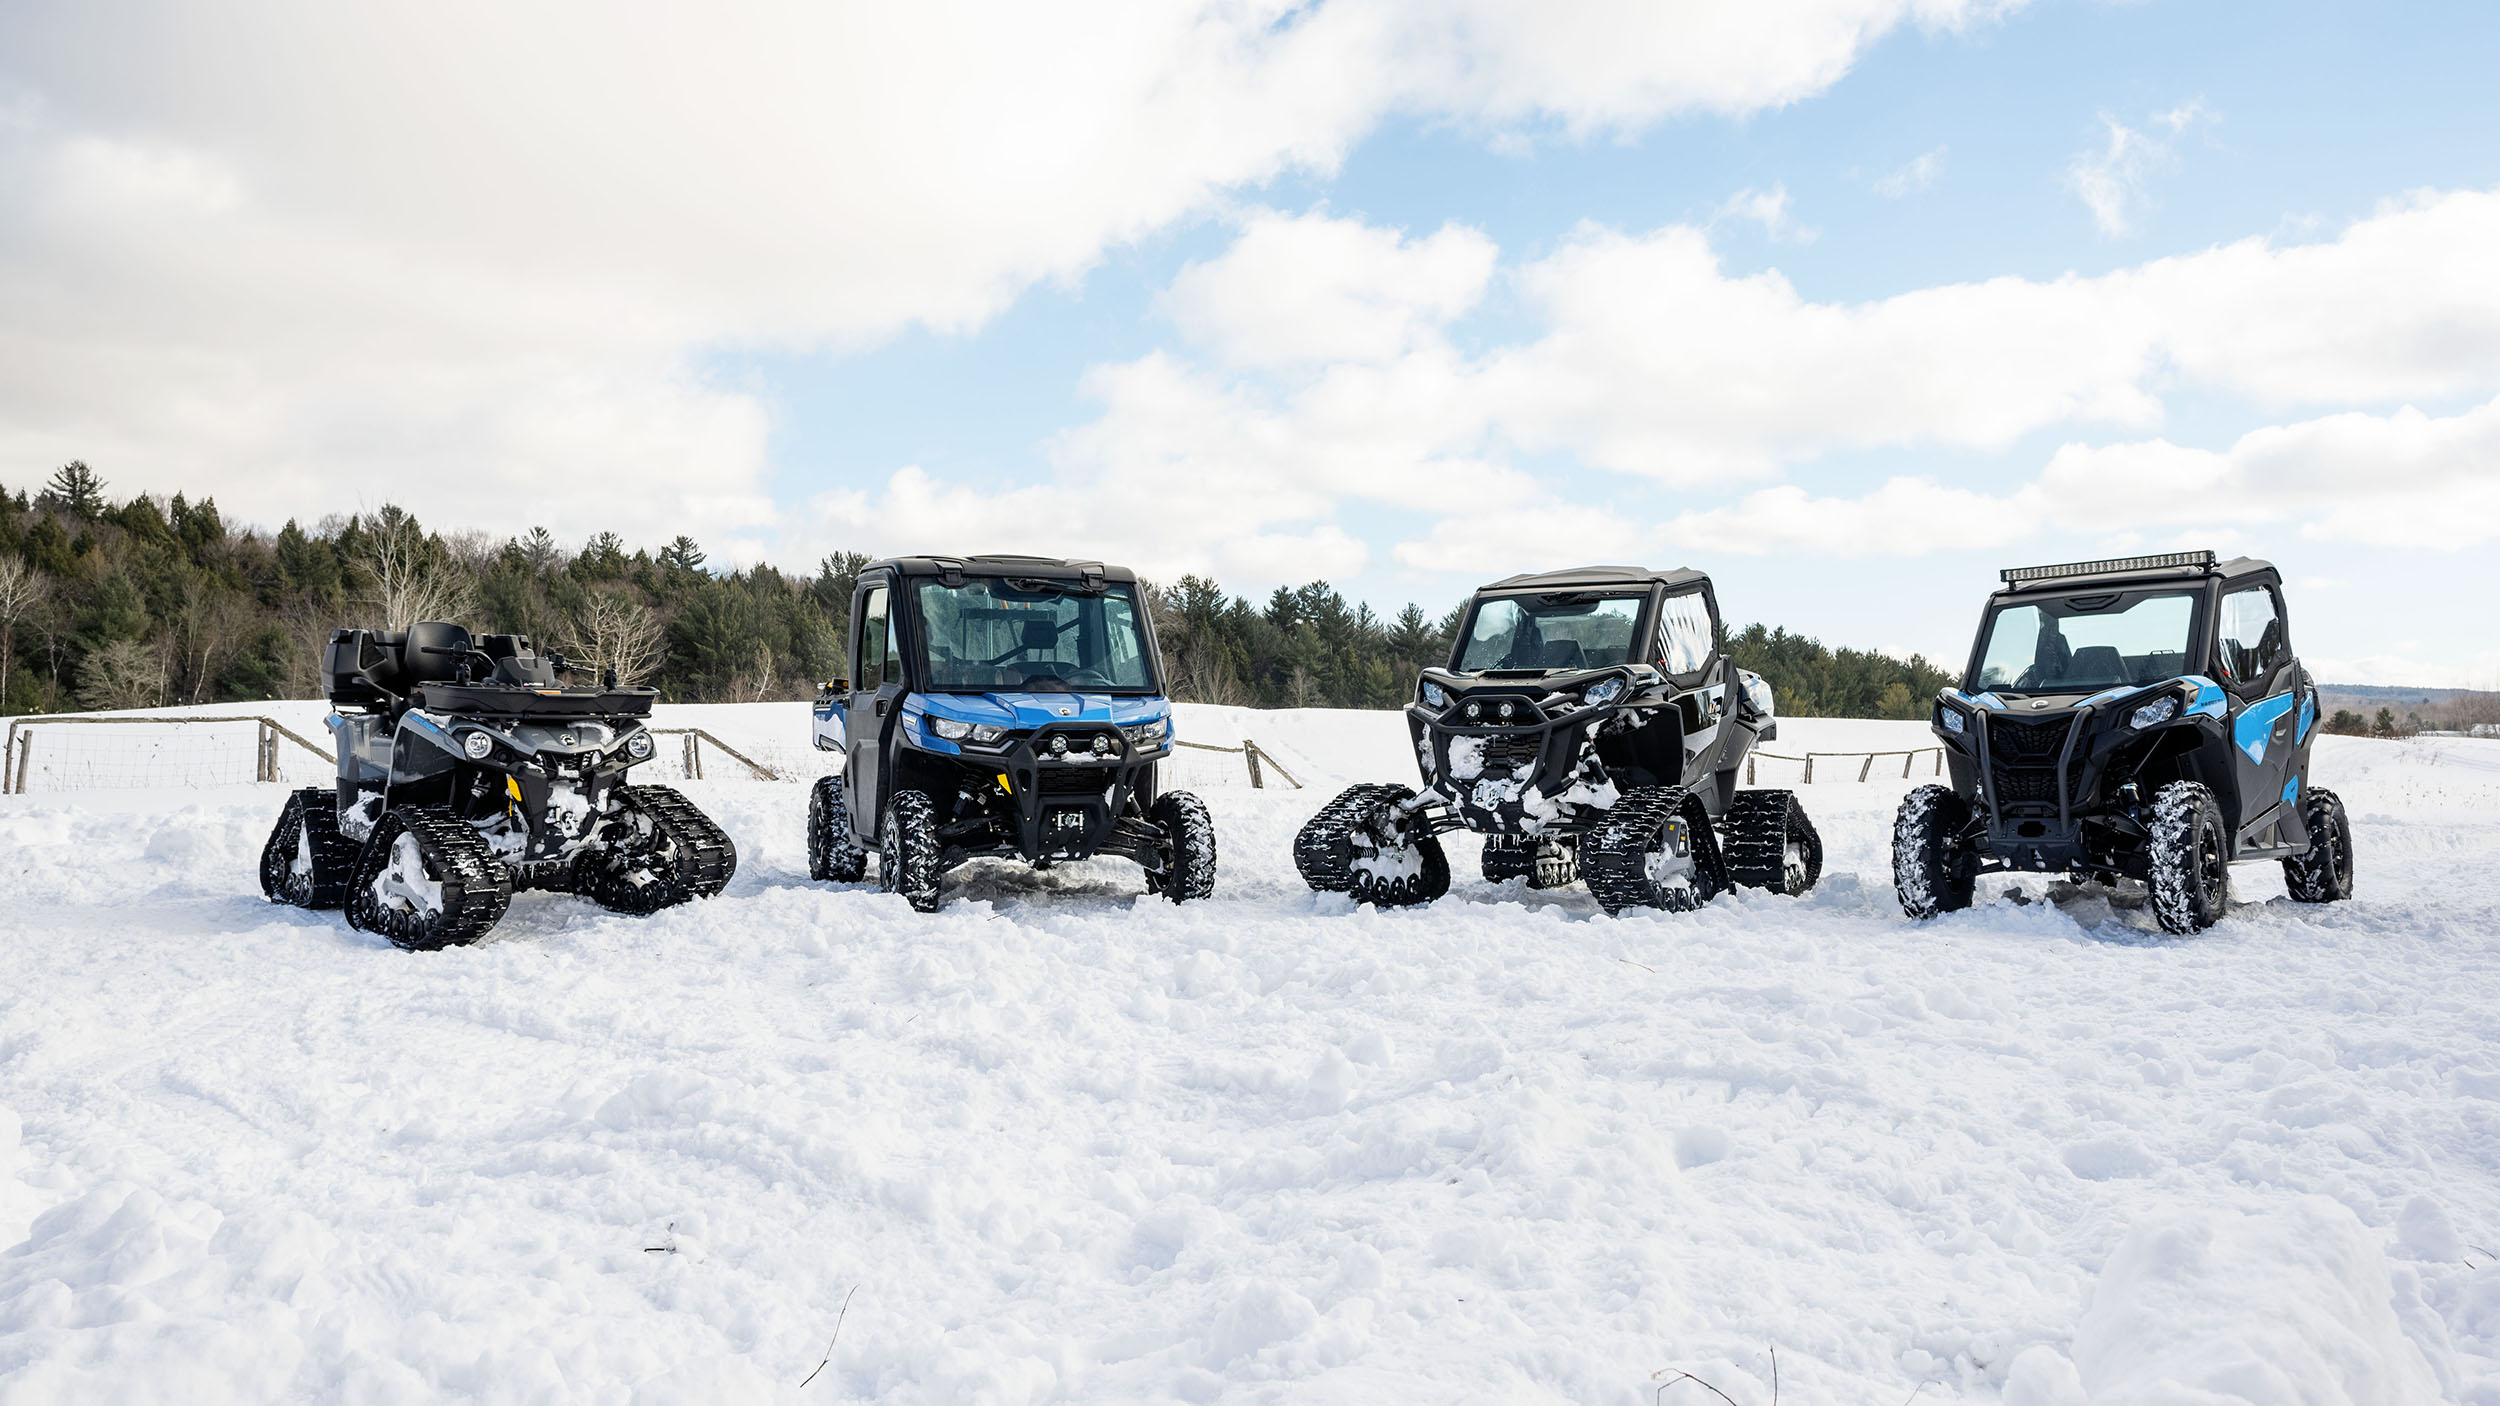 Four Can-Am vehicles sitting idle